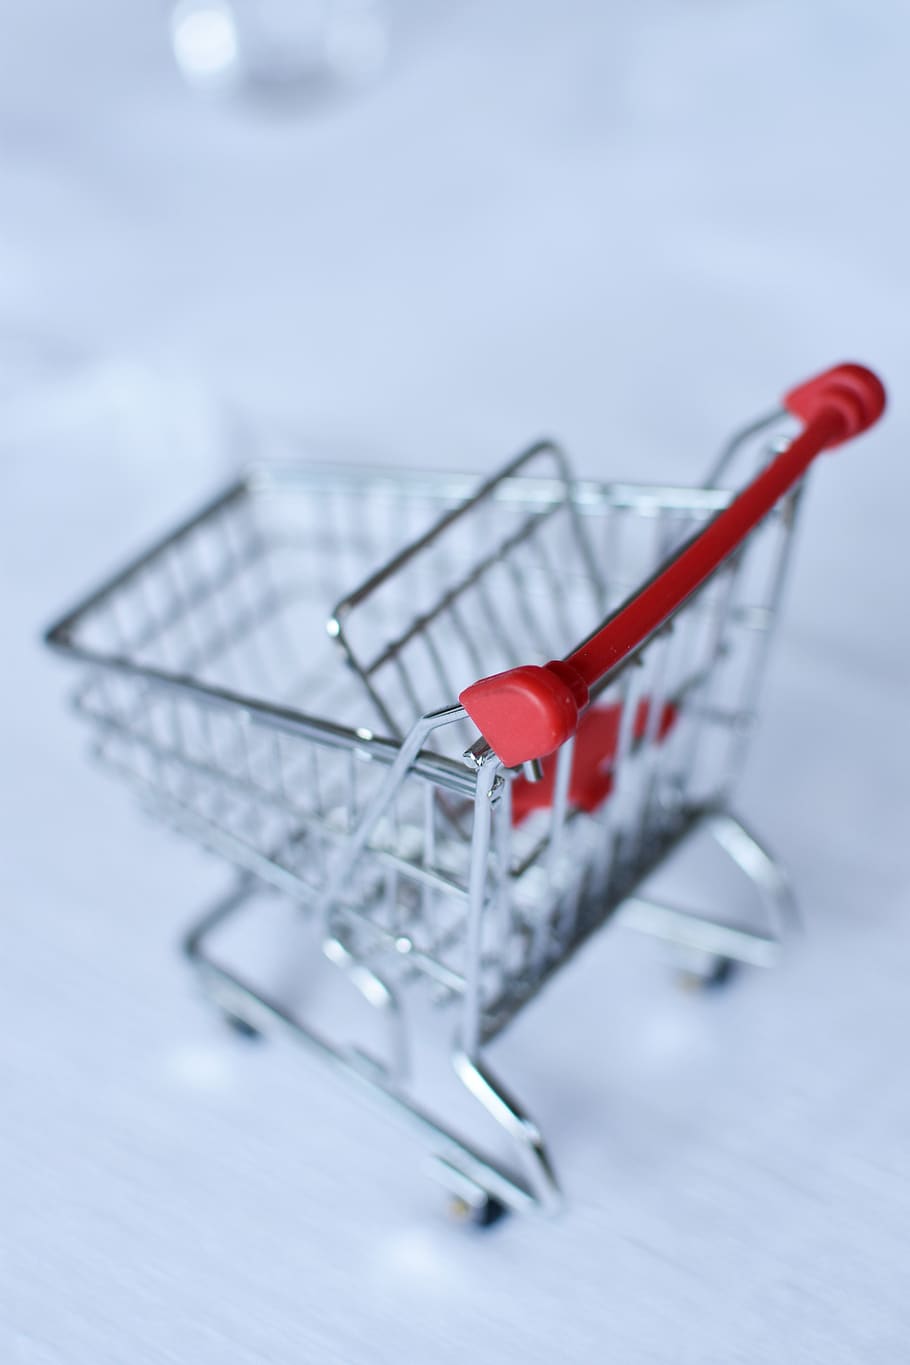 shopping cart, shopping, small, studio shot, indoors, red, close-up, consumerism, selective focus, retail